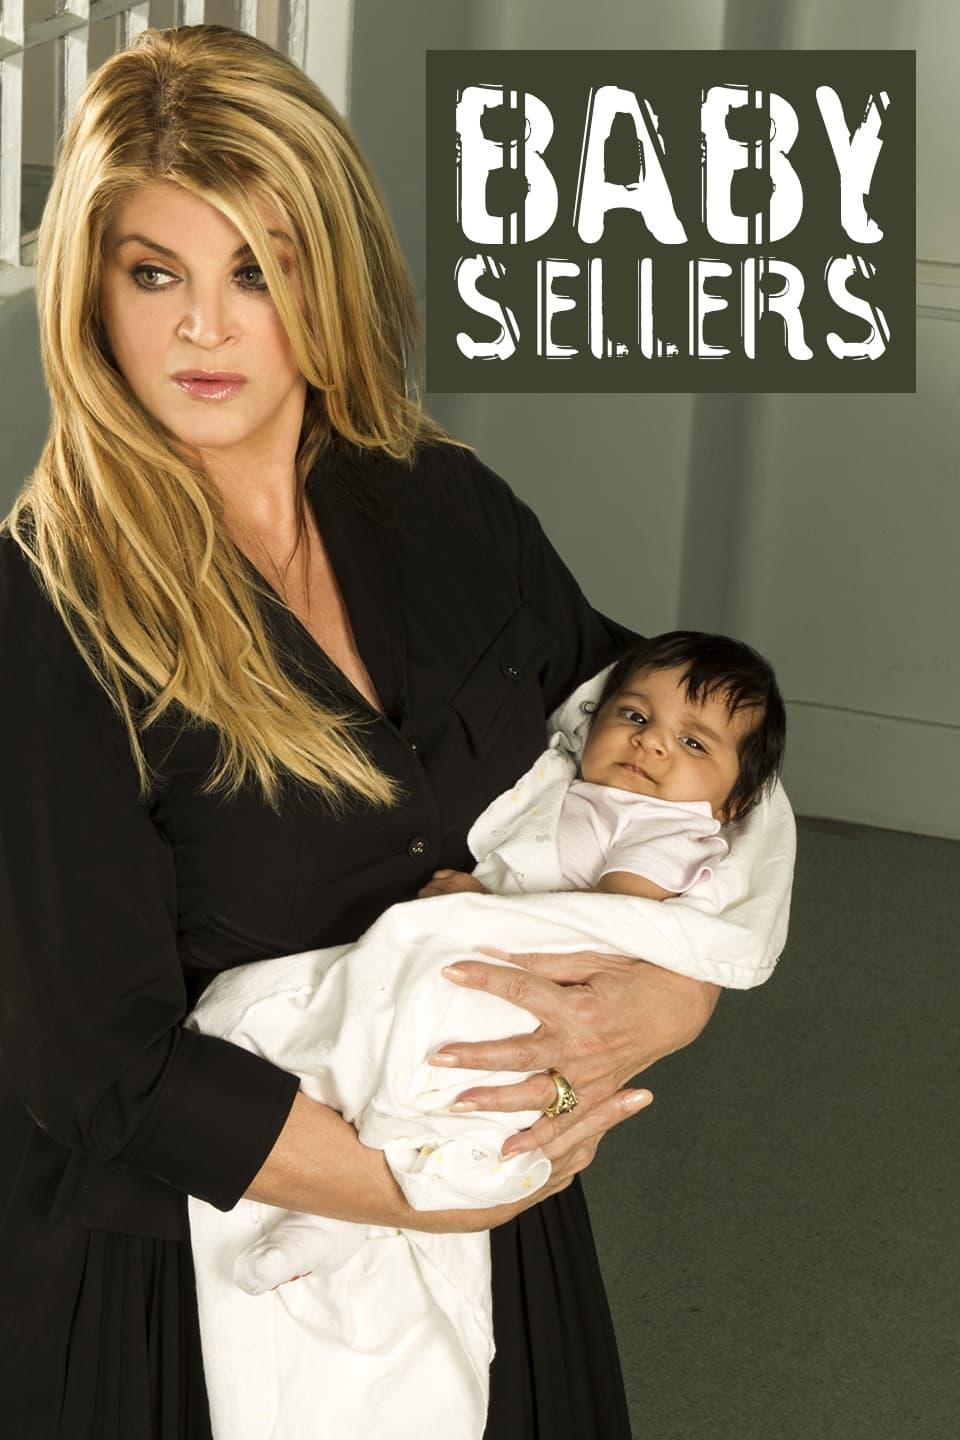 Baby Sellers poster